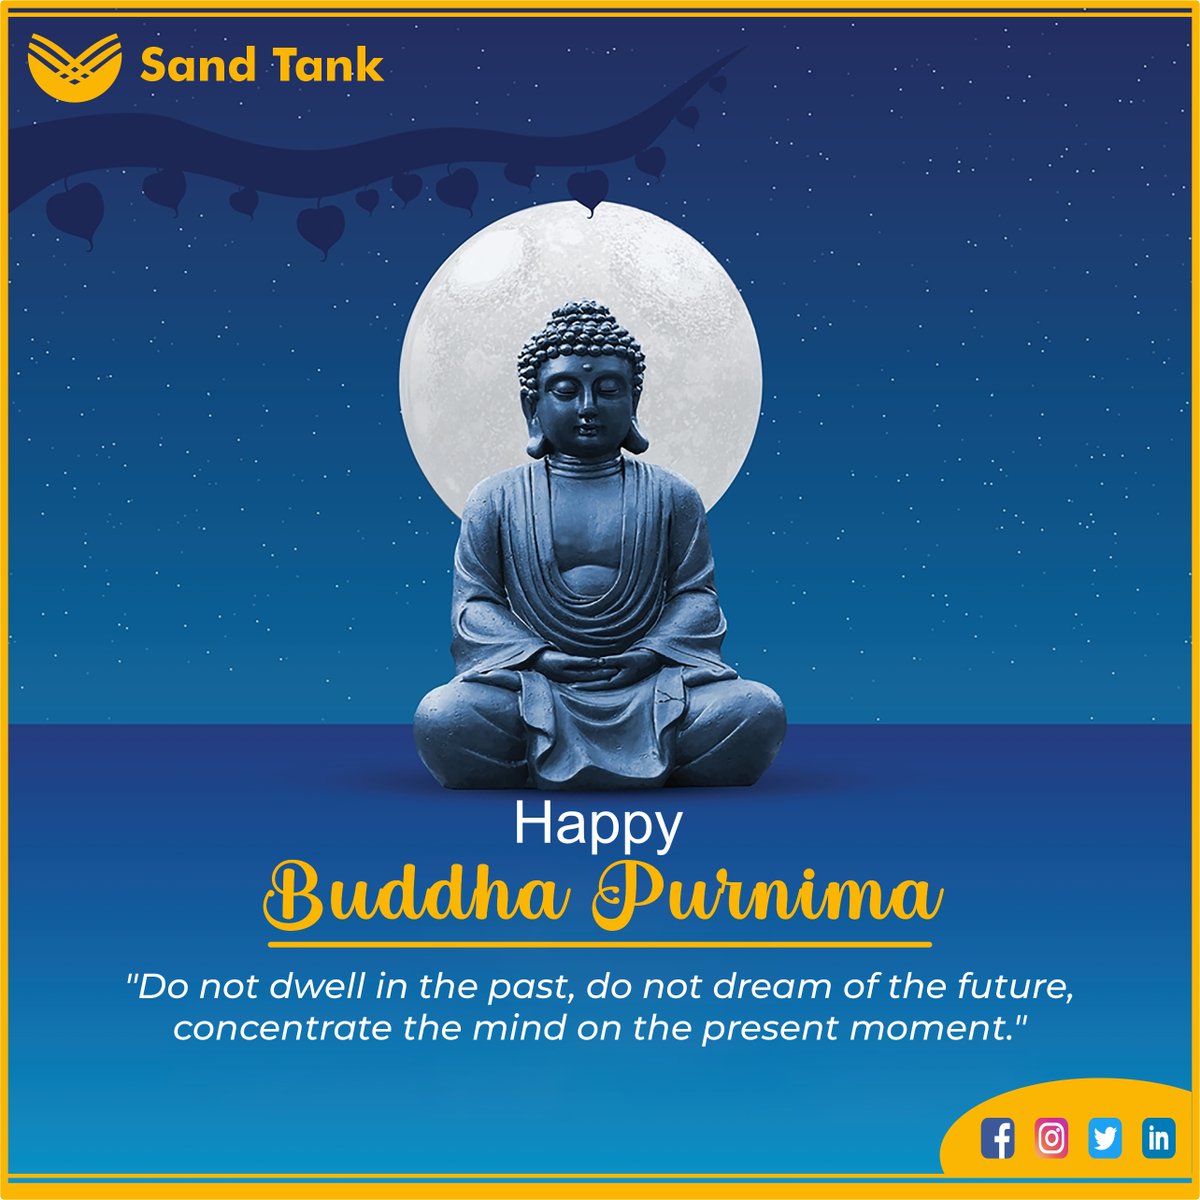 Today, we celebrate Buddha Purnima, honoring the birth, enlightenment, and Nirvana of Lord Buddha. Let's strive to embody his teachings of love and mindfulness.
 
#Sandtankfoundation #HappyBuddhaPurnima #BuddhaPurnima #Peace #Enlightenment #Compassion #Wisdom #TeachingsOfBuddha